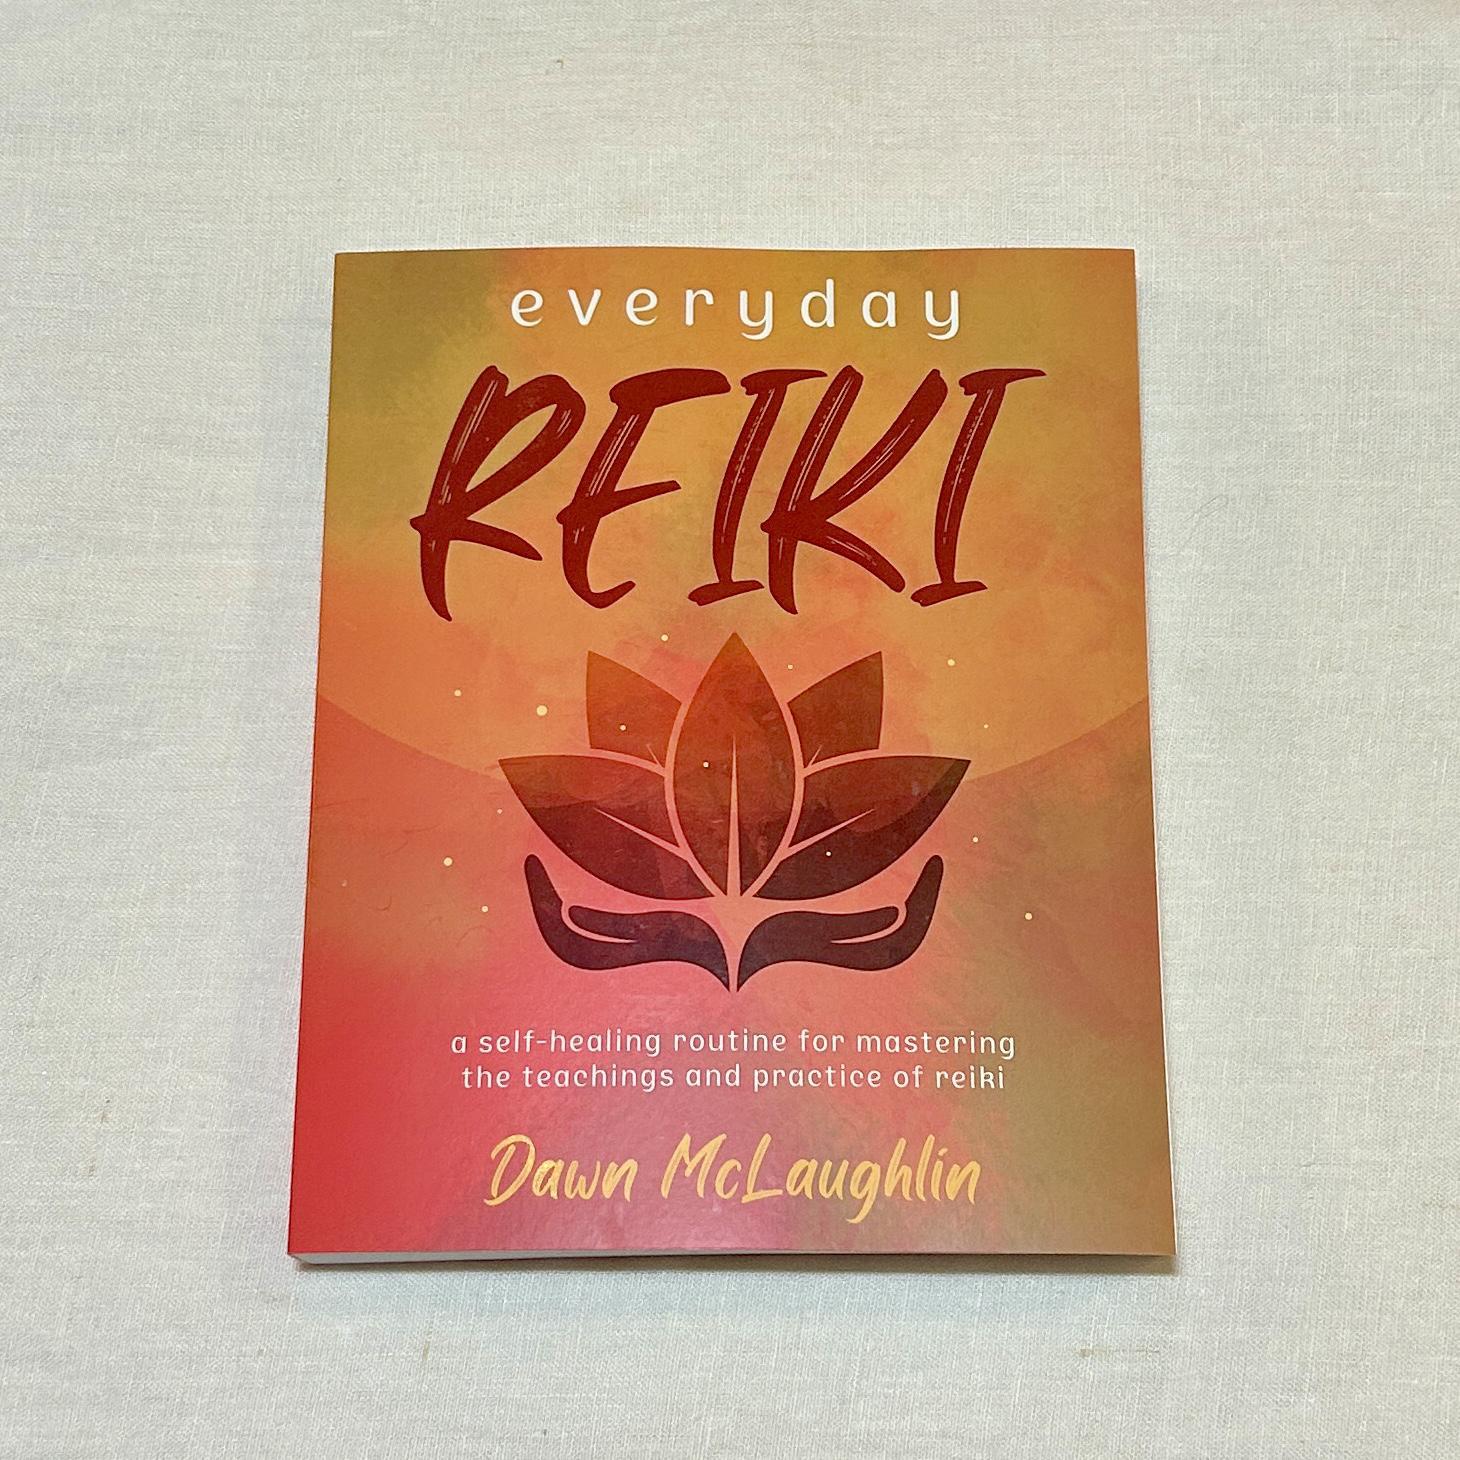 Everyday Reiki: A Self-Healing Routine for Mastering the Teachings and Practice of Reiki. Based on the Usui Ryoho Reiki system, this book provides immersion experiences that give you all the tools you need to gain energetic health and balance for yourself and those around you.